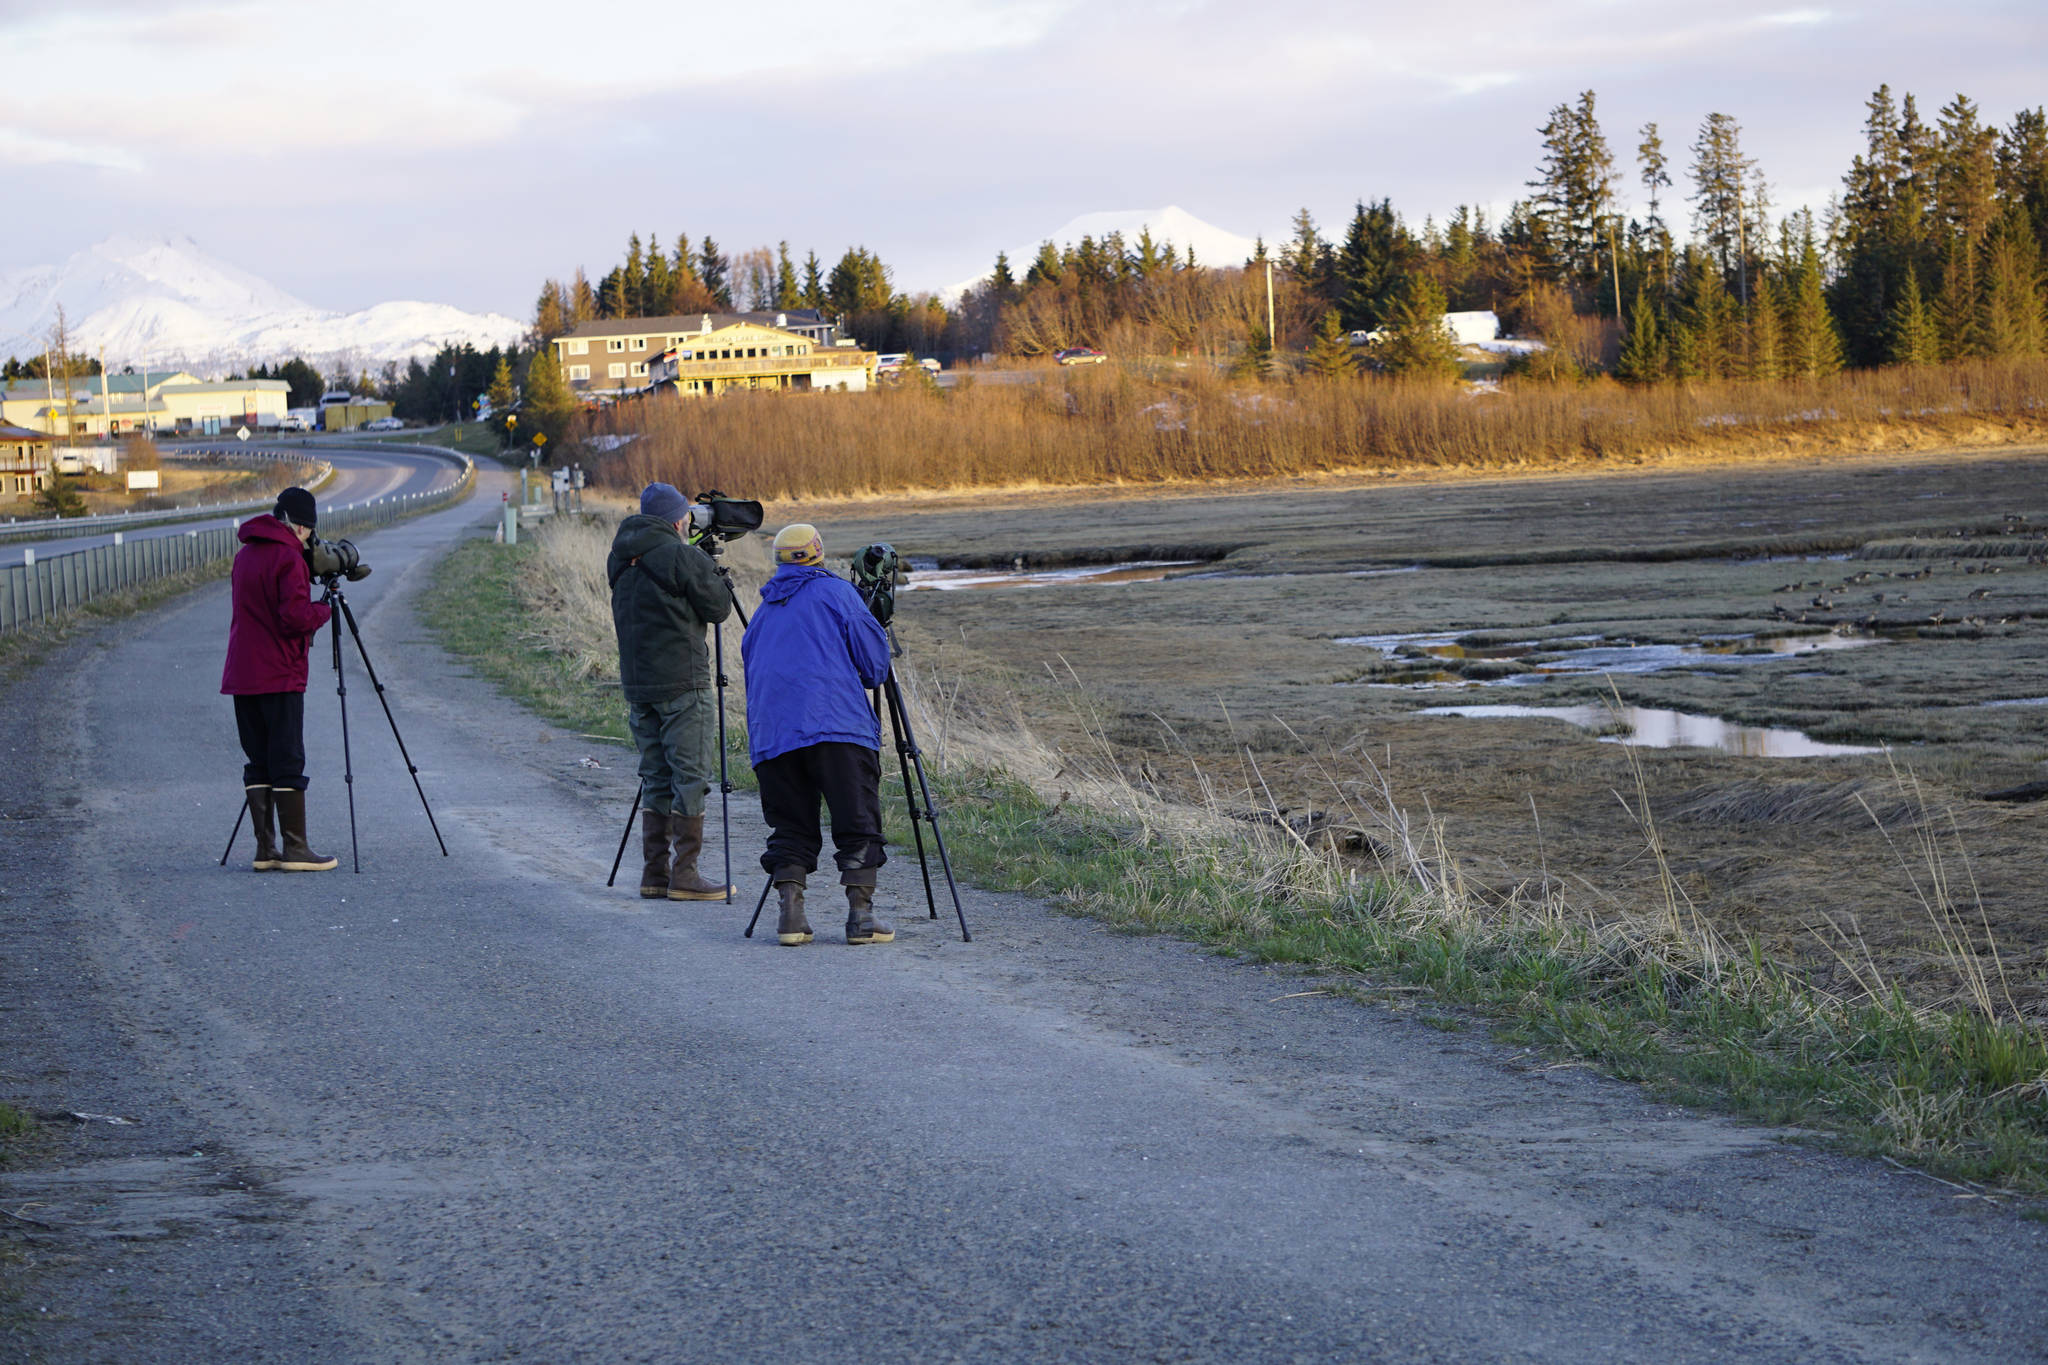 From left to right, Nancy Lord, Dale Chorman and Laurie Daniel look for shorebirds and other birds during a shorebird monitoring session at Beluga Slough on April 23, 2019, in Homer, Alaska. The birders are part of an annual volunteer program to count and track shorebirds and other migrating birds during April and May. In this photo they’re looking at greater white fronted geese and cackling Canada geese that were feeding in the slough. (Photo by Michael Armstrong/Homer News)